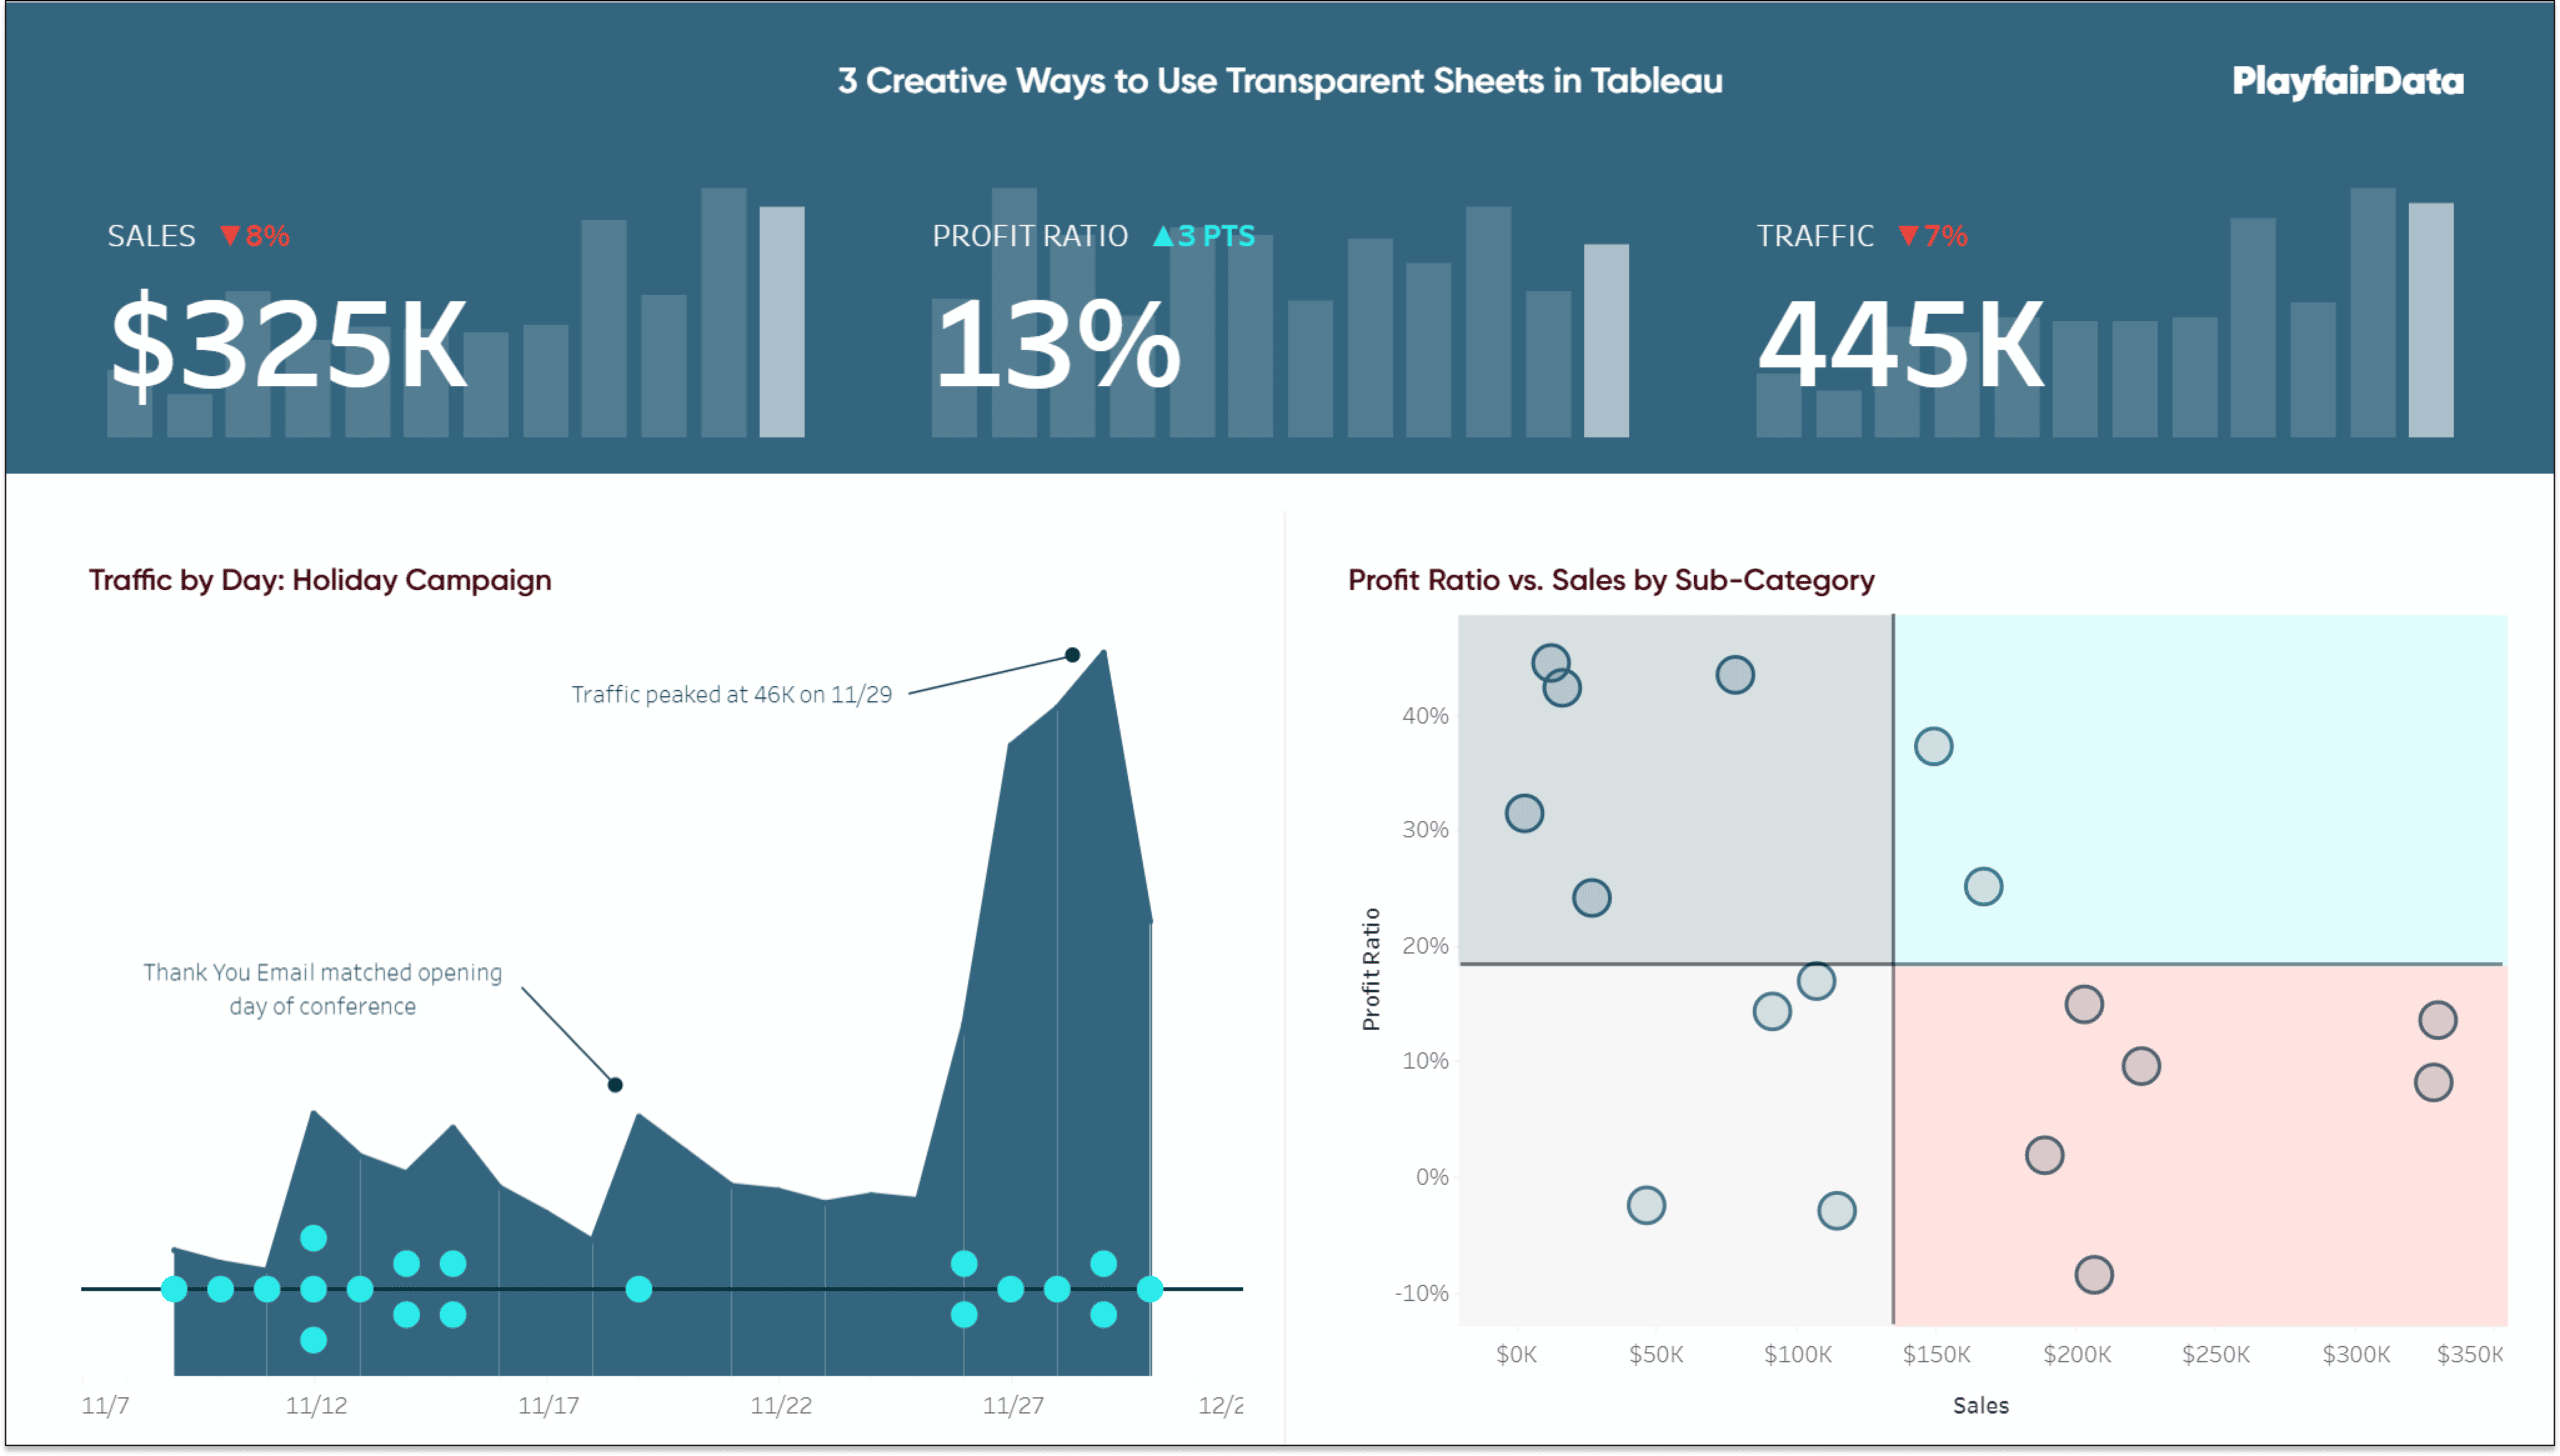 3 Creative Ways to Use Transparent Sheets to Add Context in Tableau